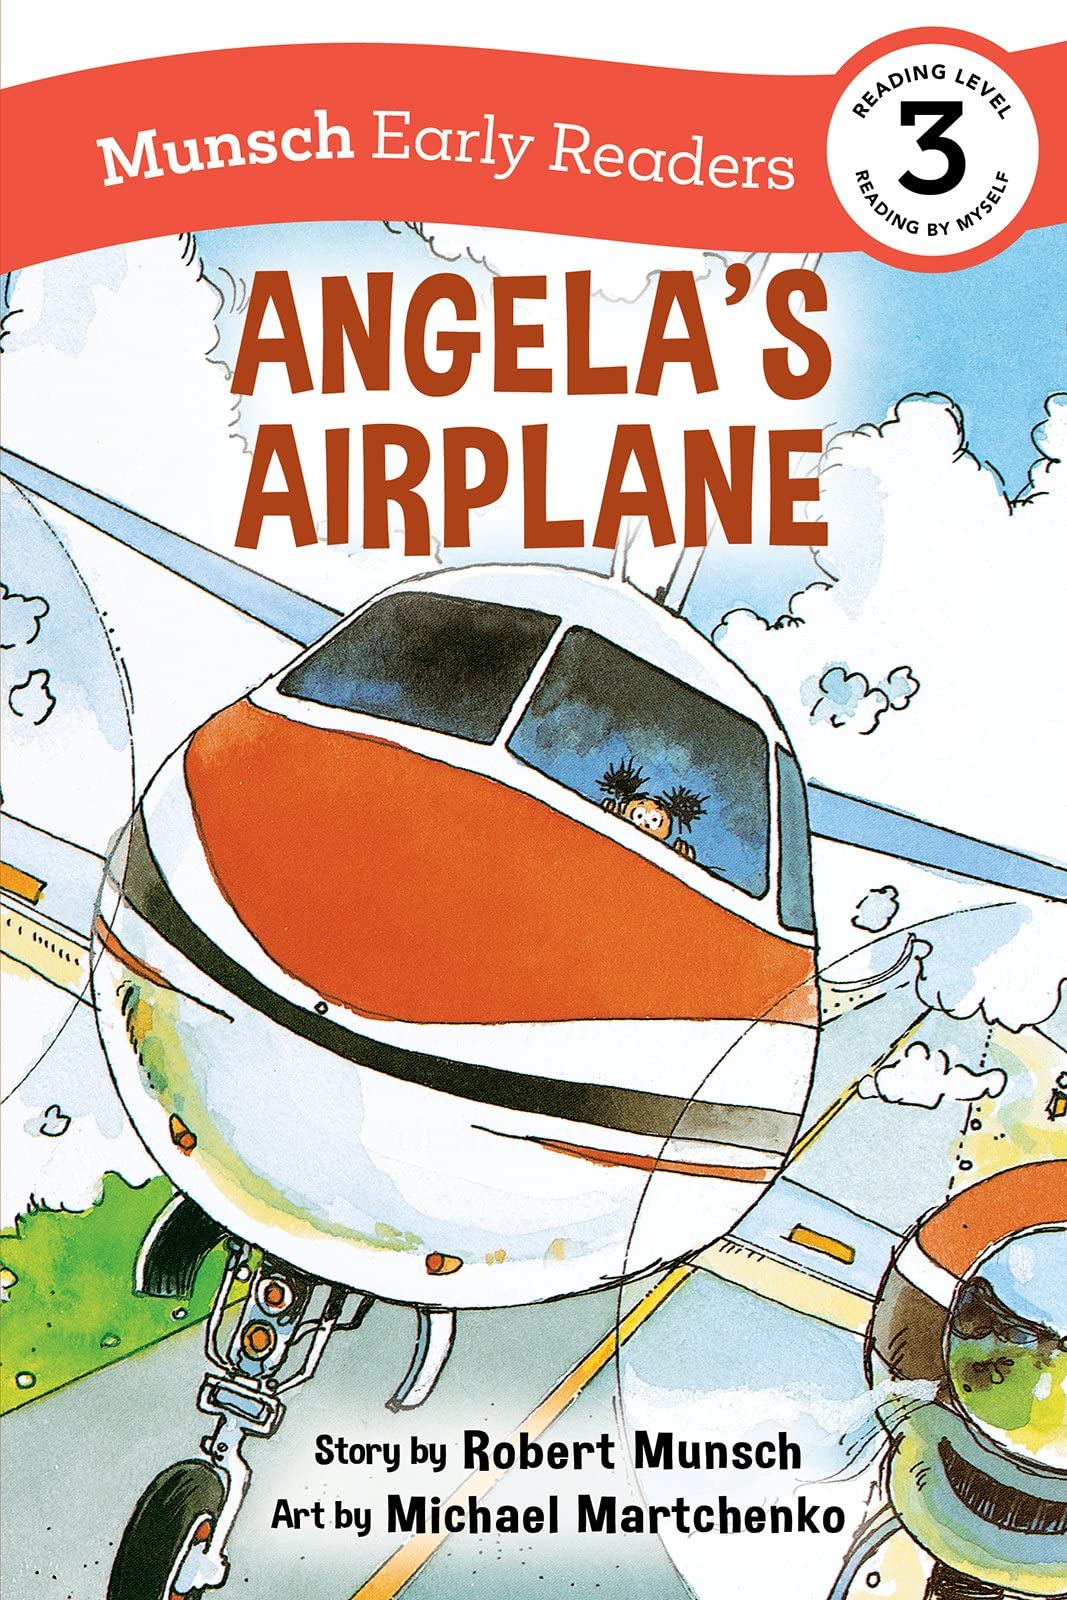 Angela’s Airplane Early Reader